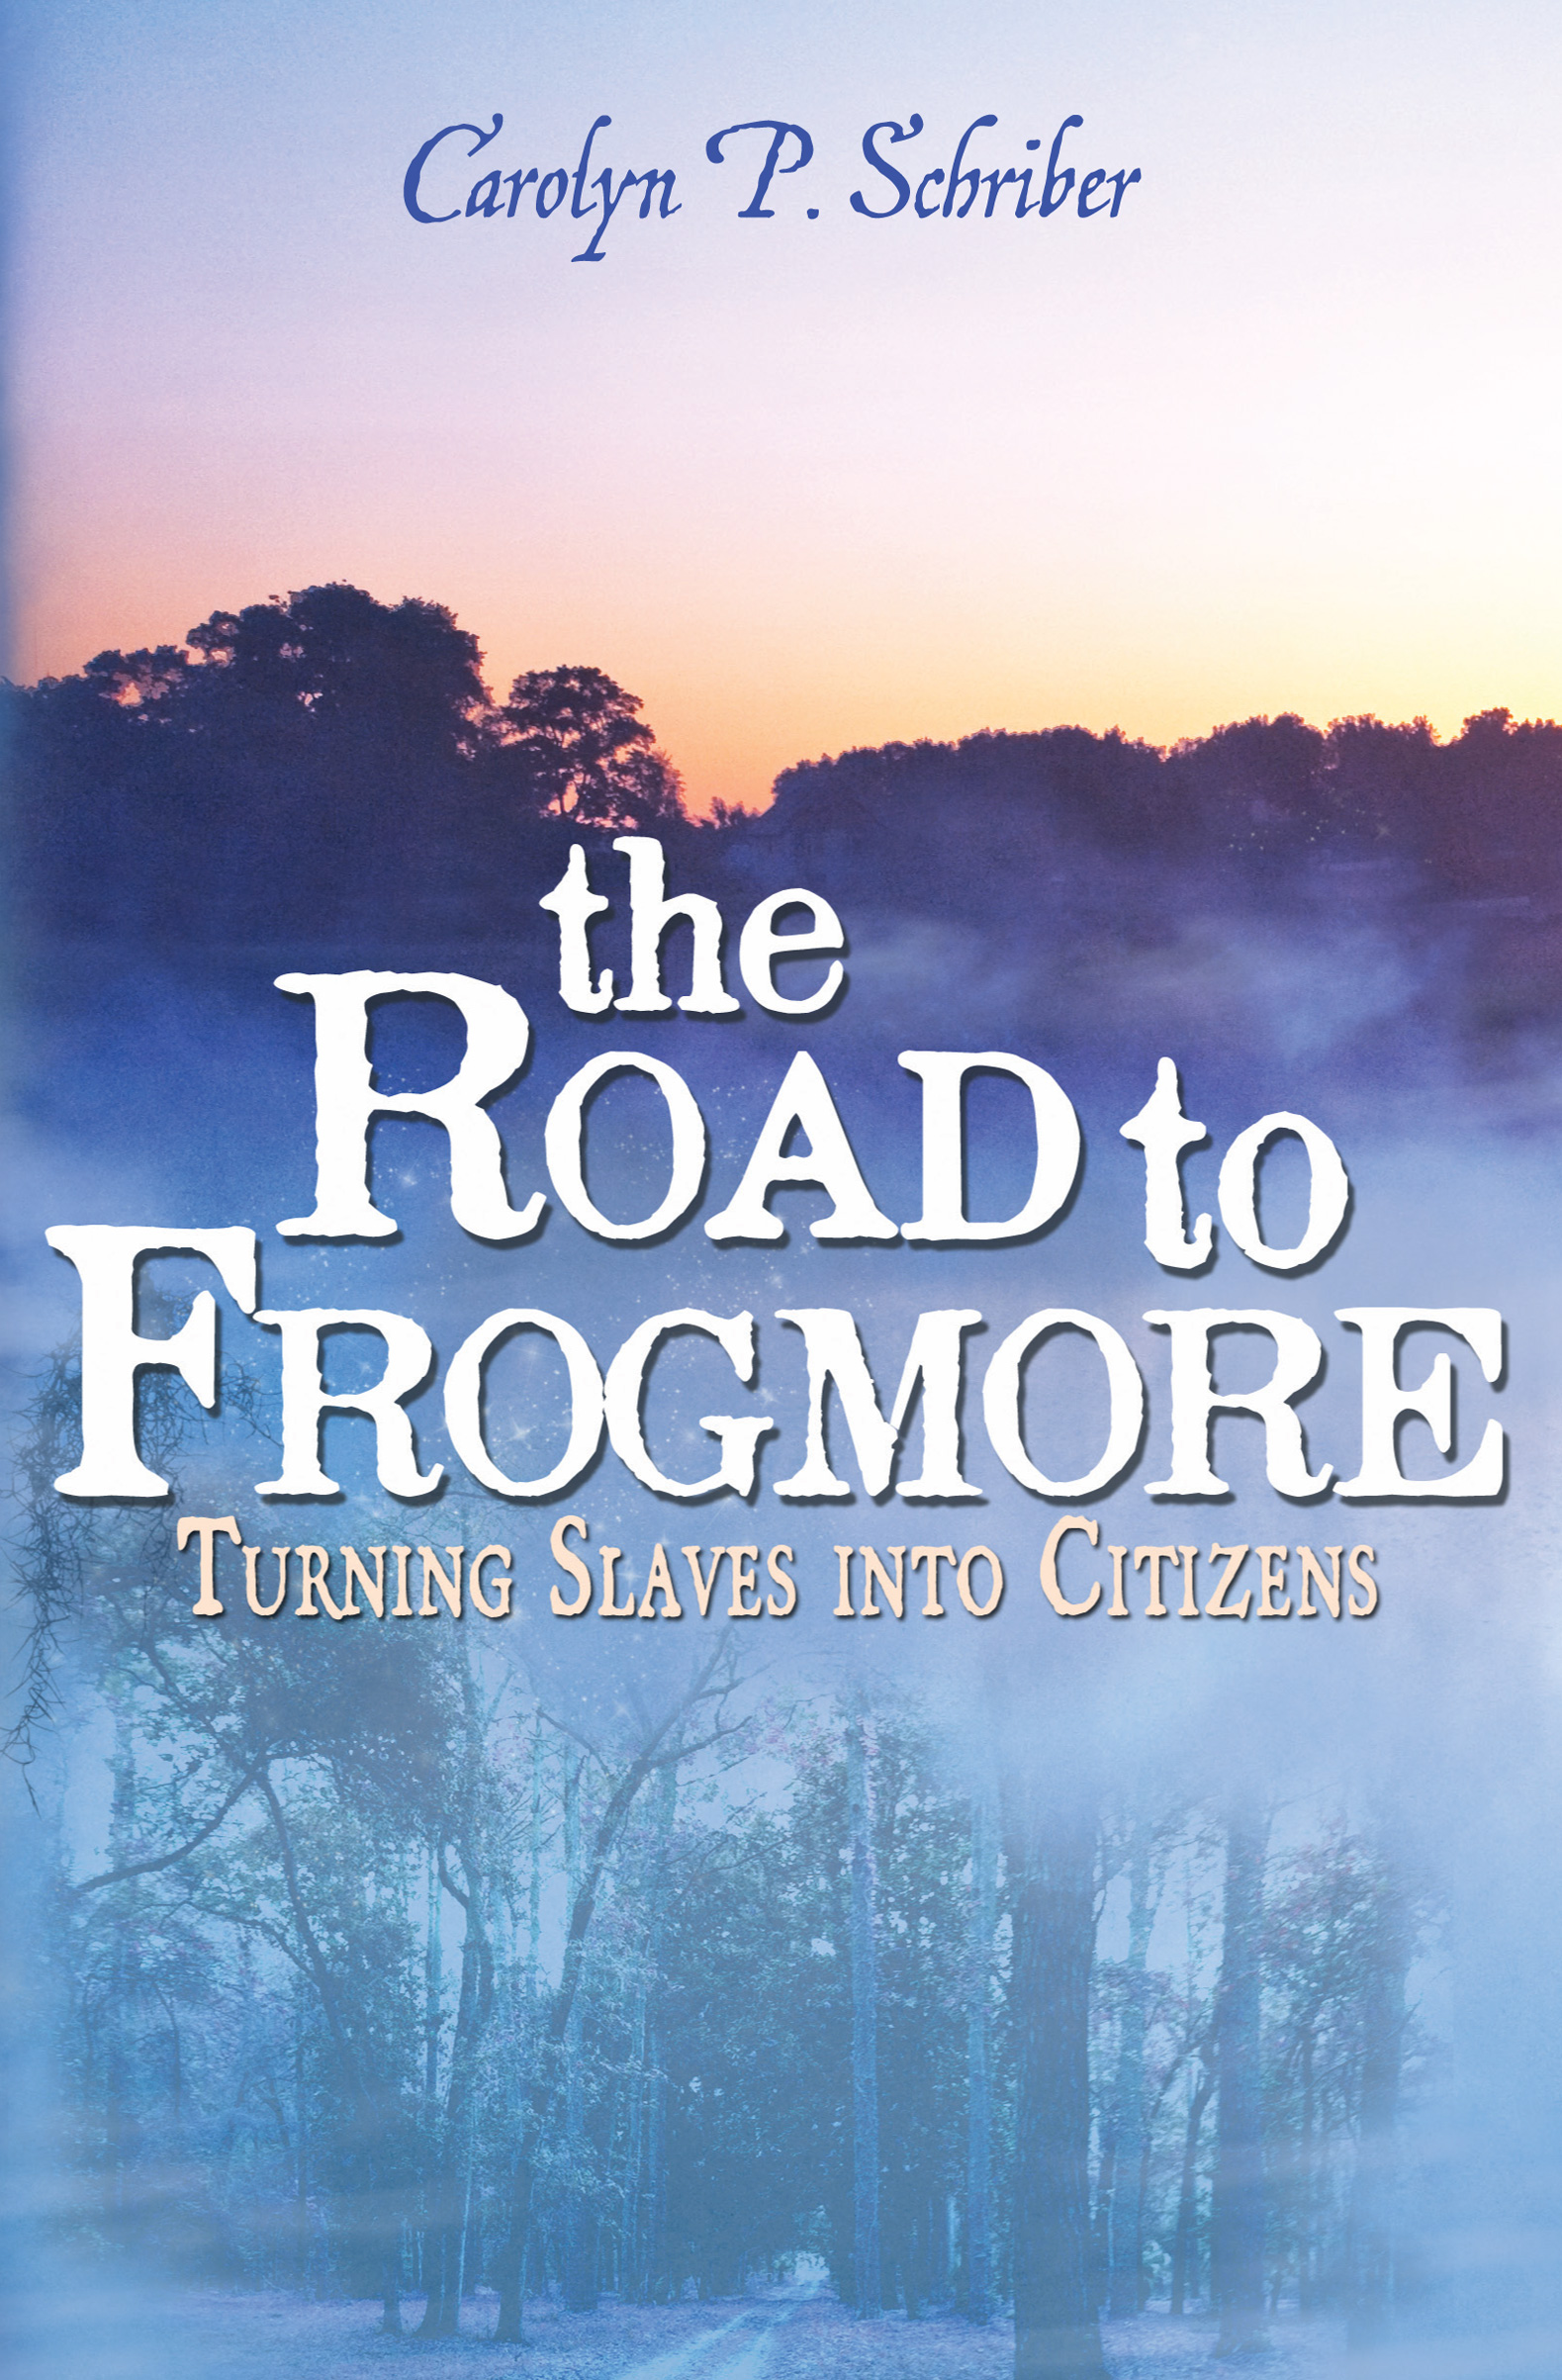 The Road to Frogmore: Turning Slaves into Citizens